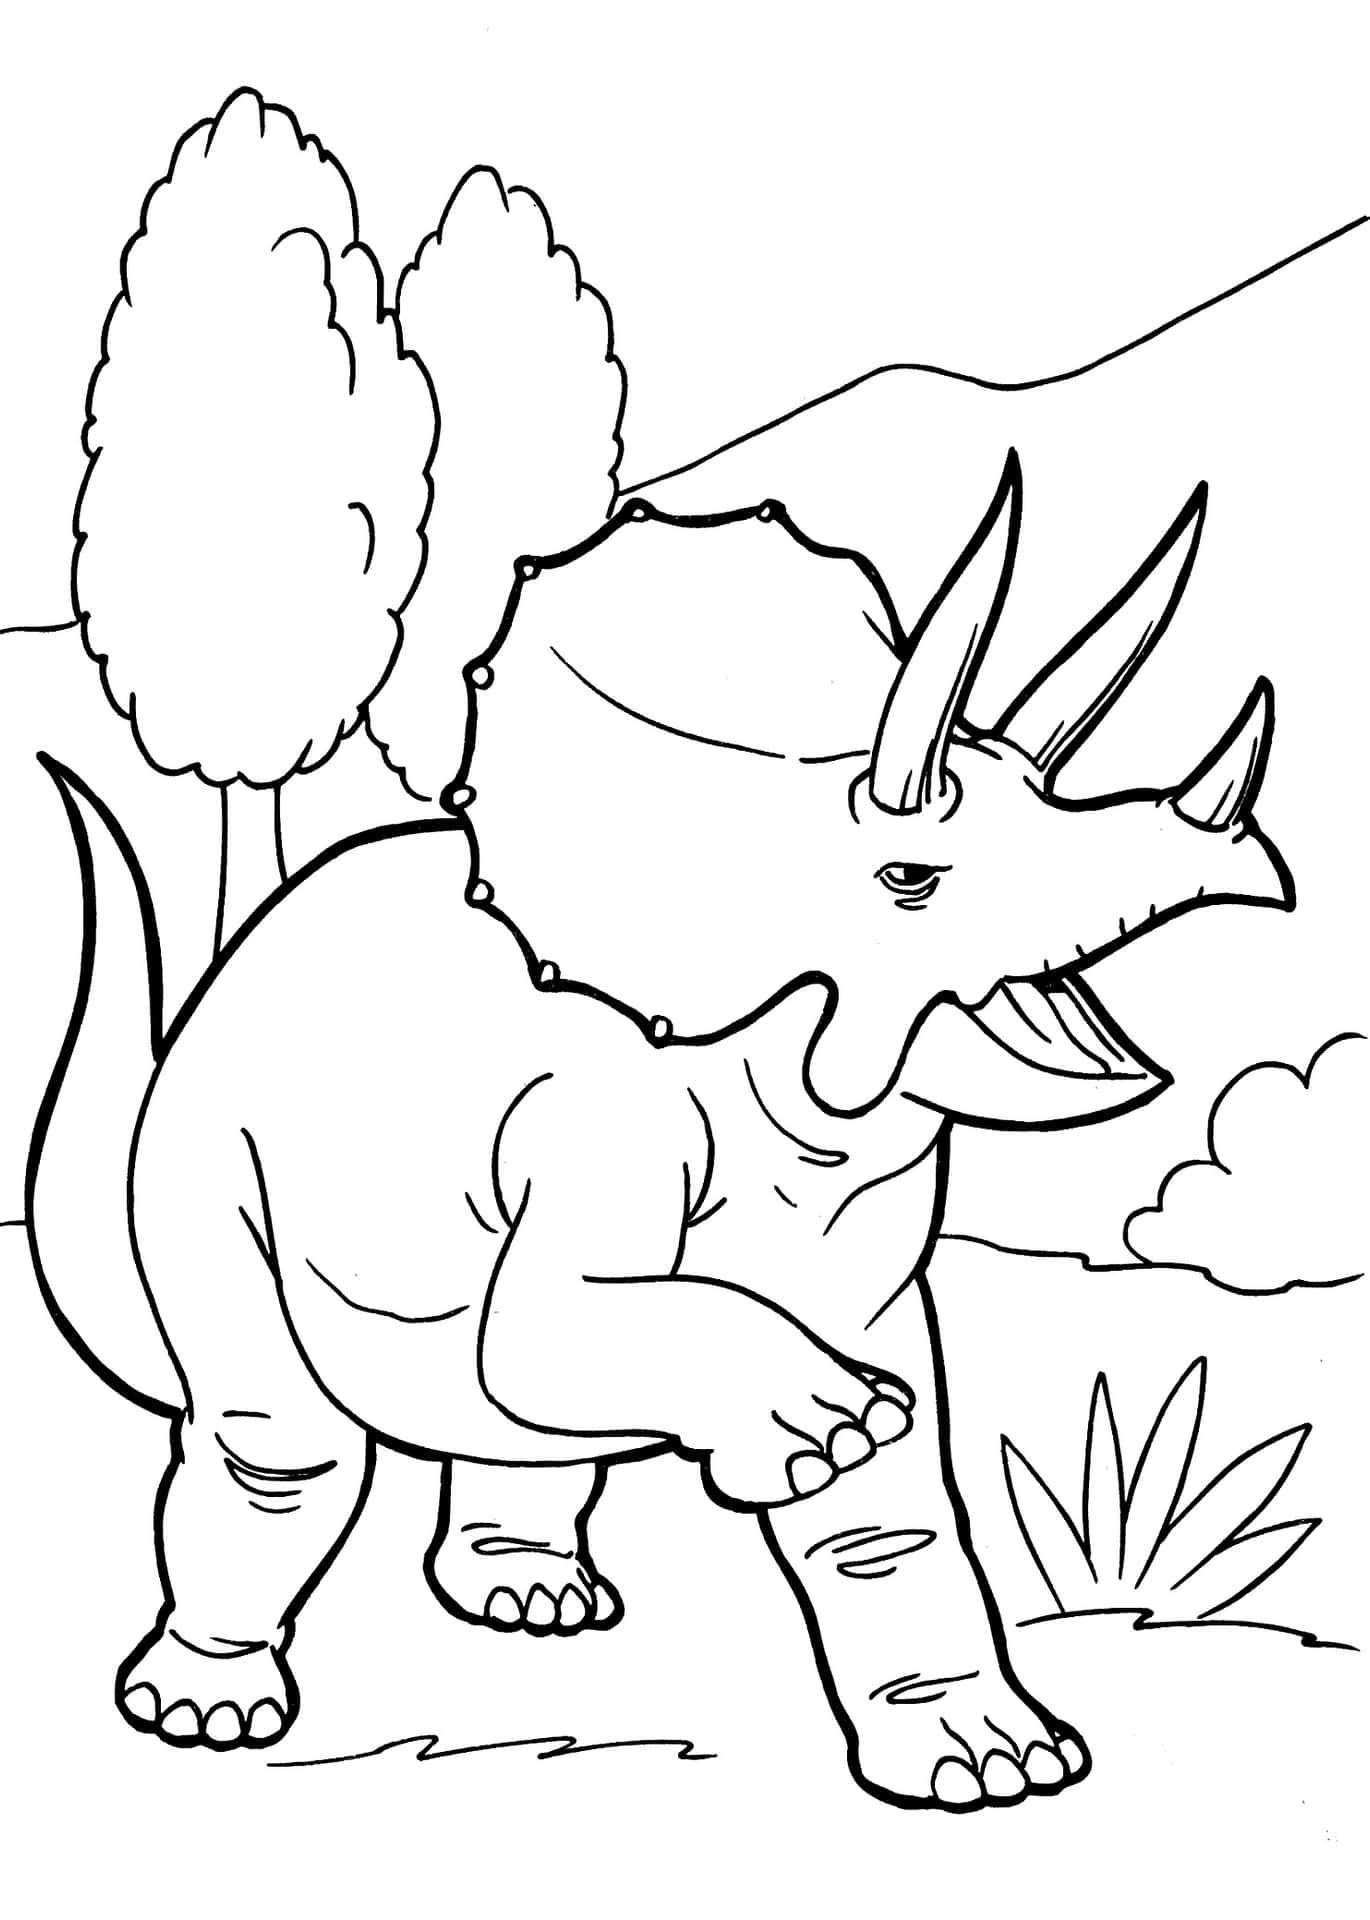 Download Triceratops Coloring Pages | Wallpapers.com